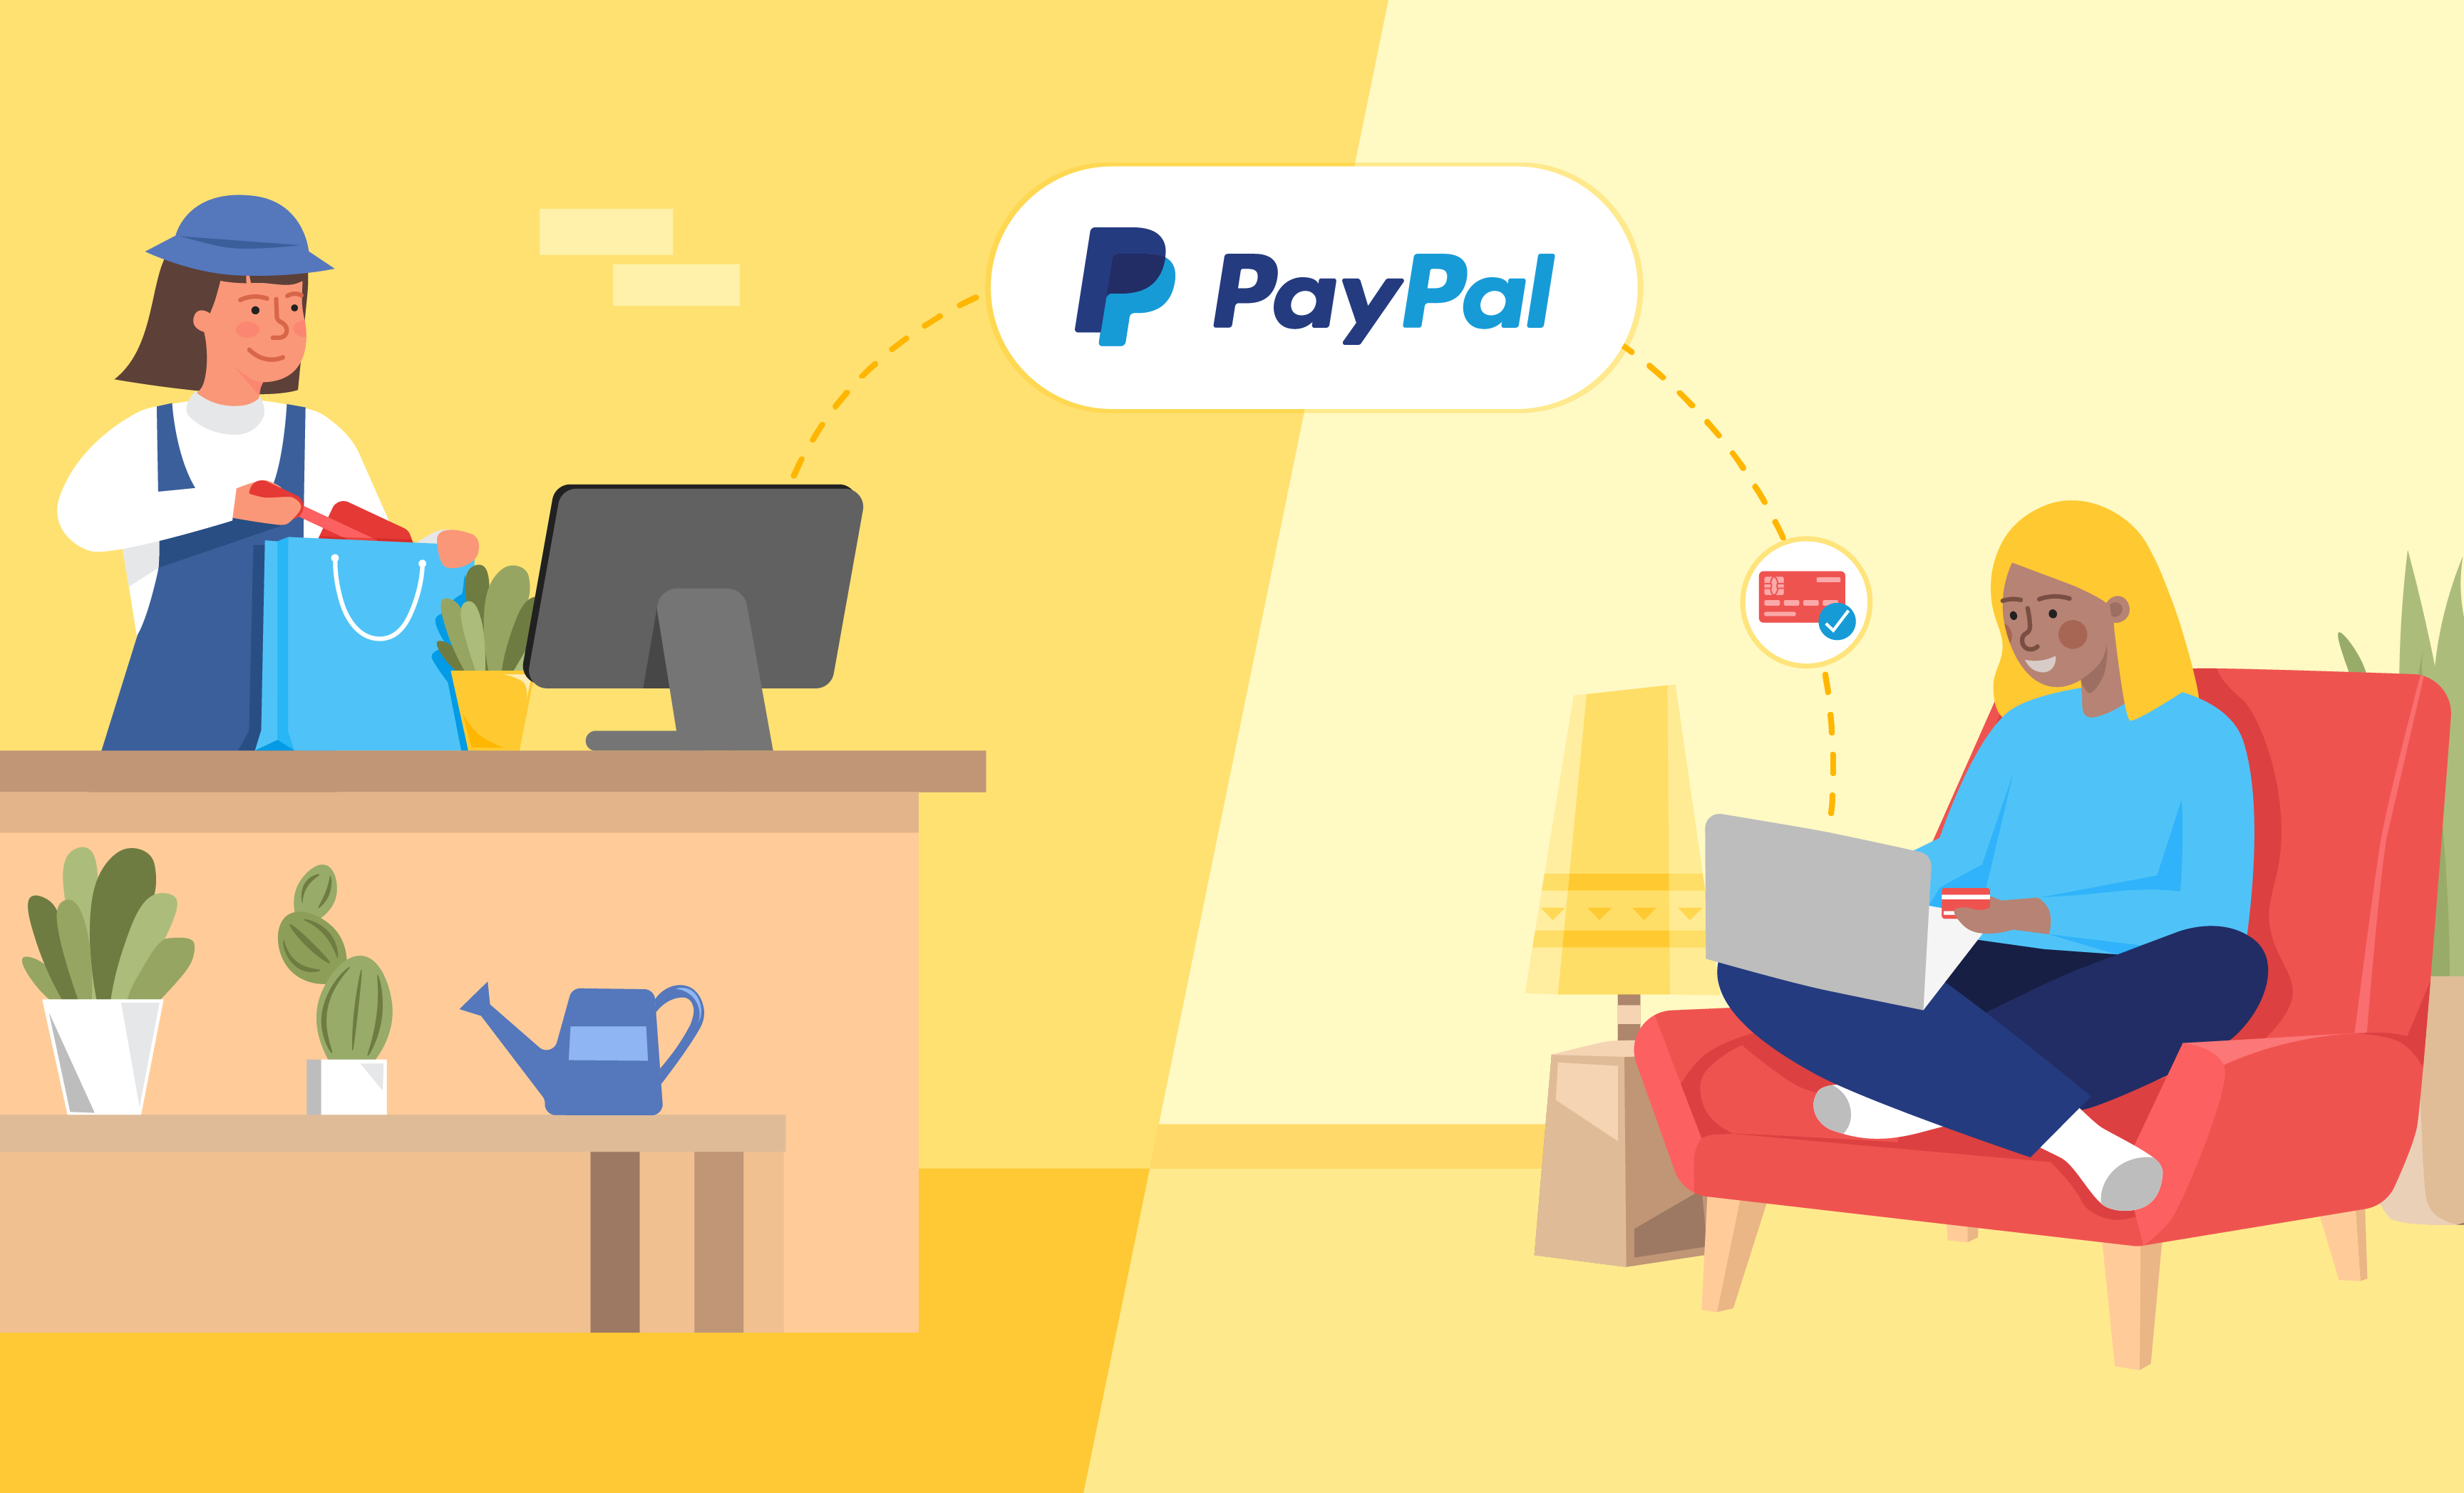 business paypal account login